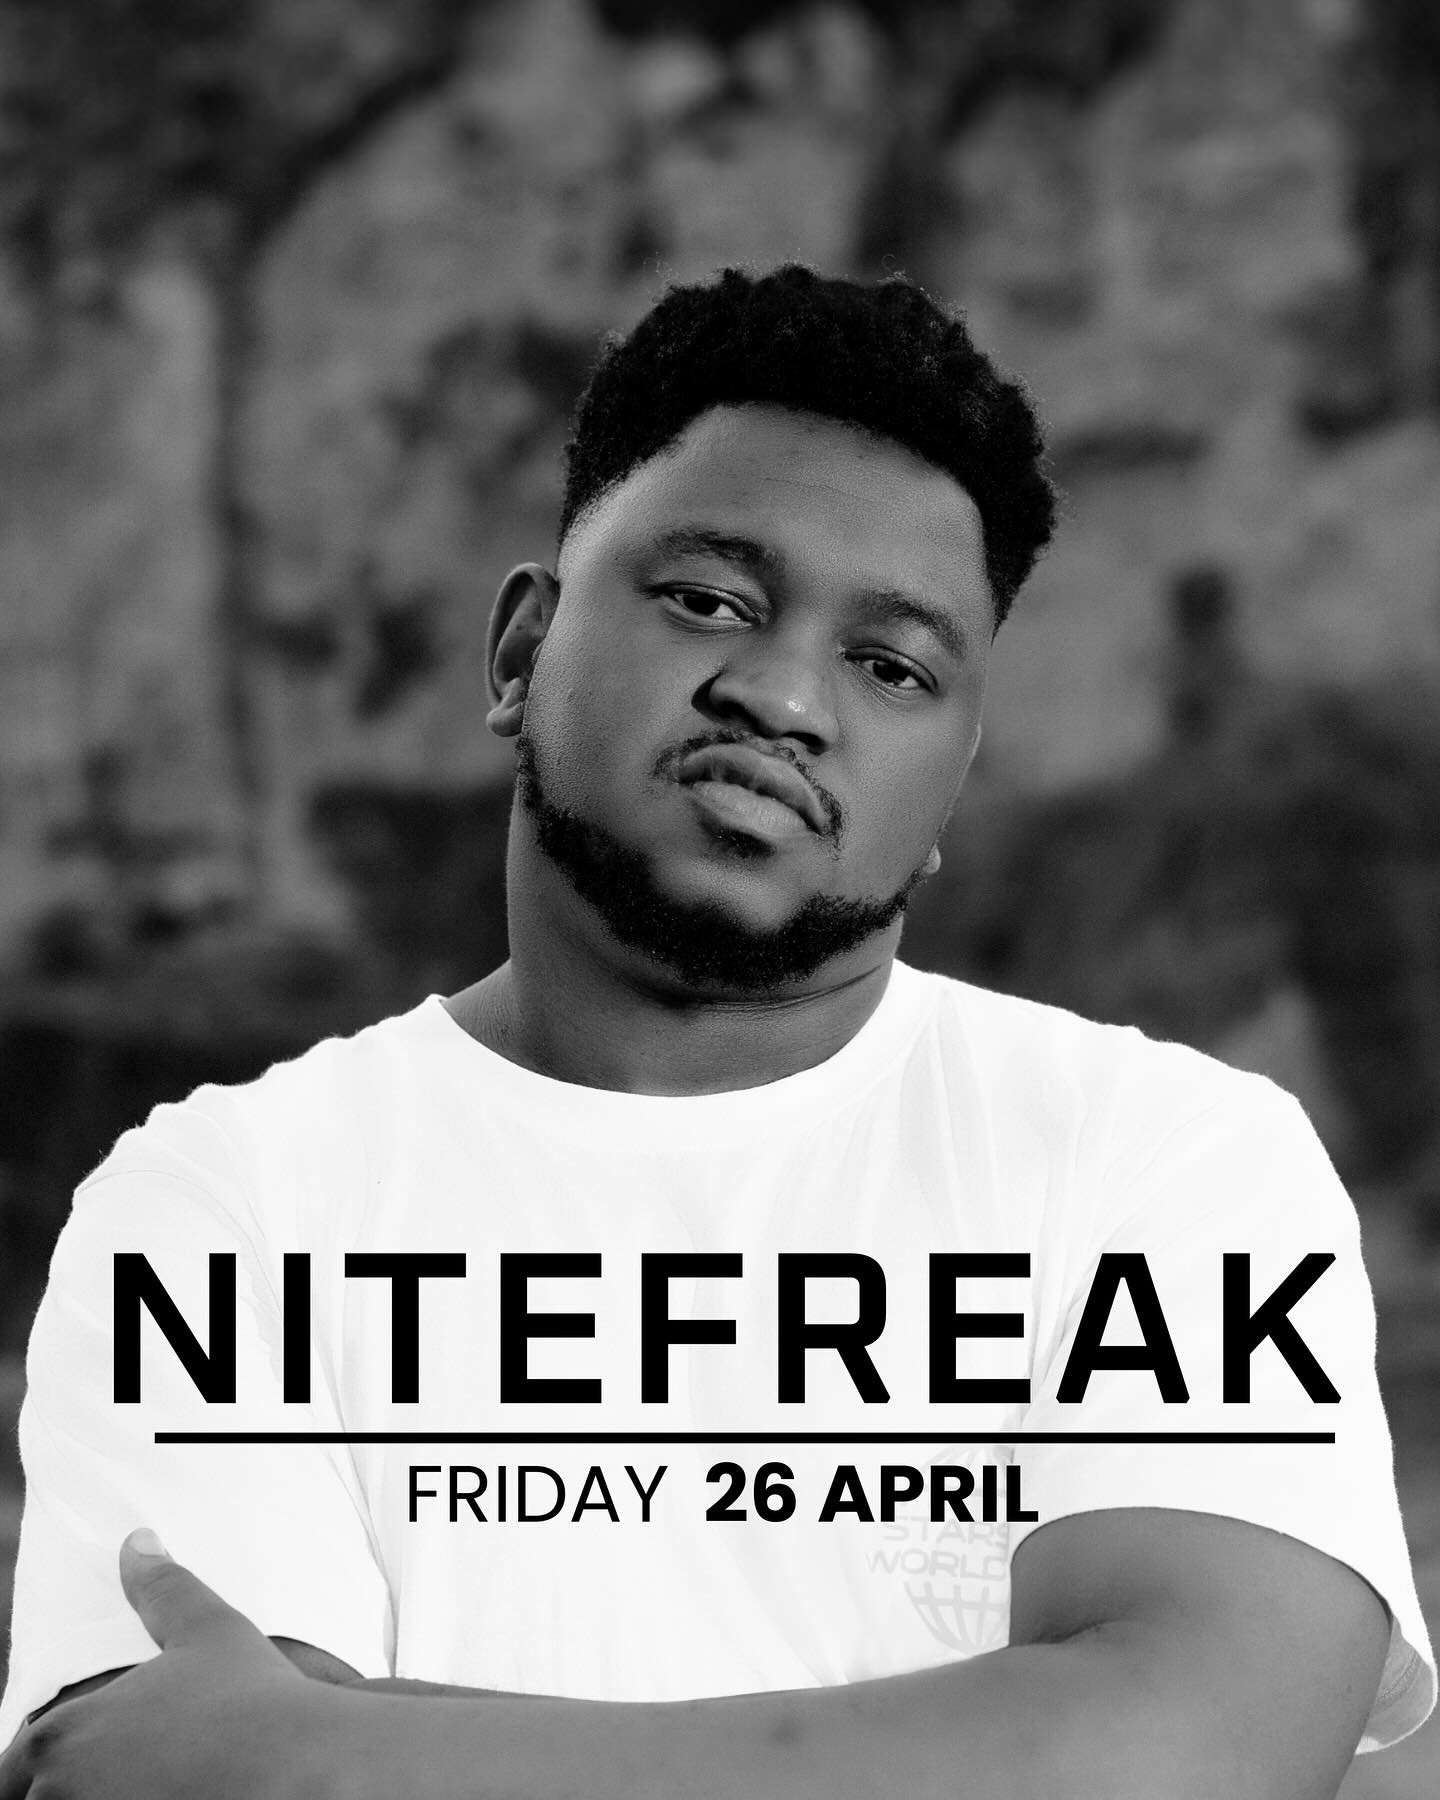 @nitefreakdj on Cafe Opera Invites this Friday. 
Secure your spot at www.cafeopera.se